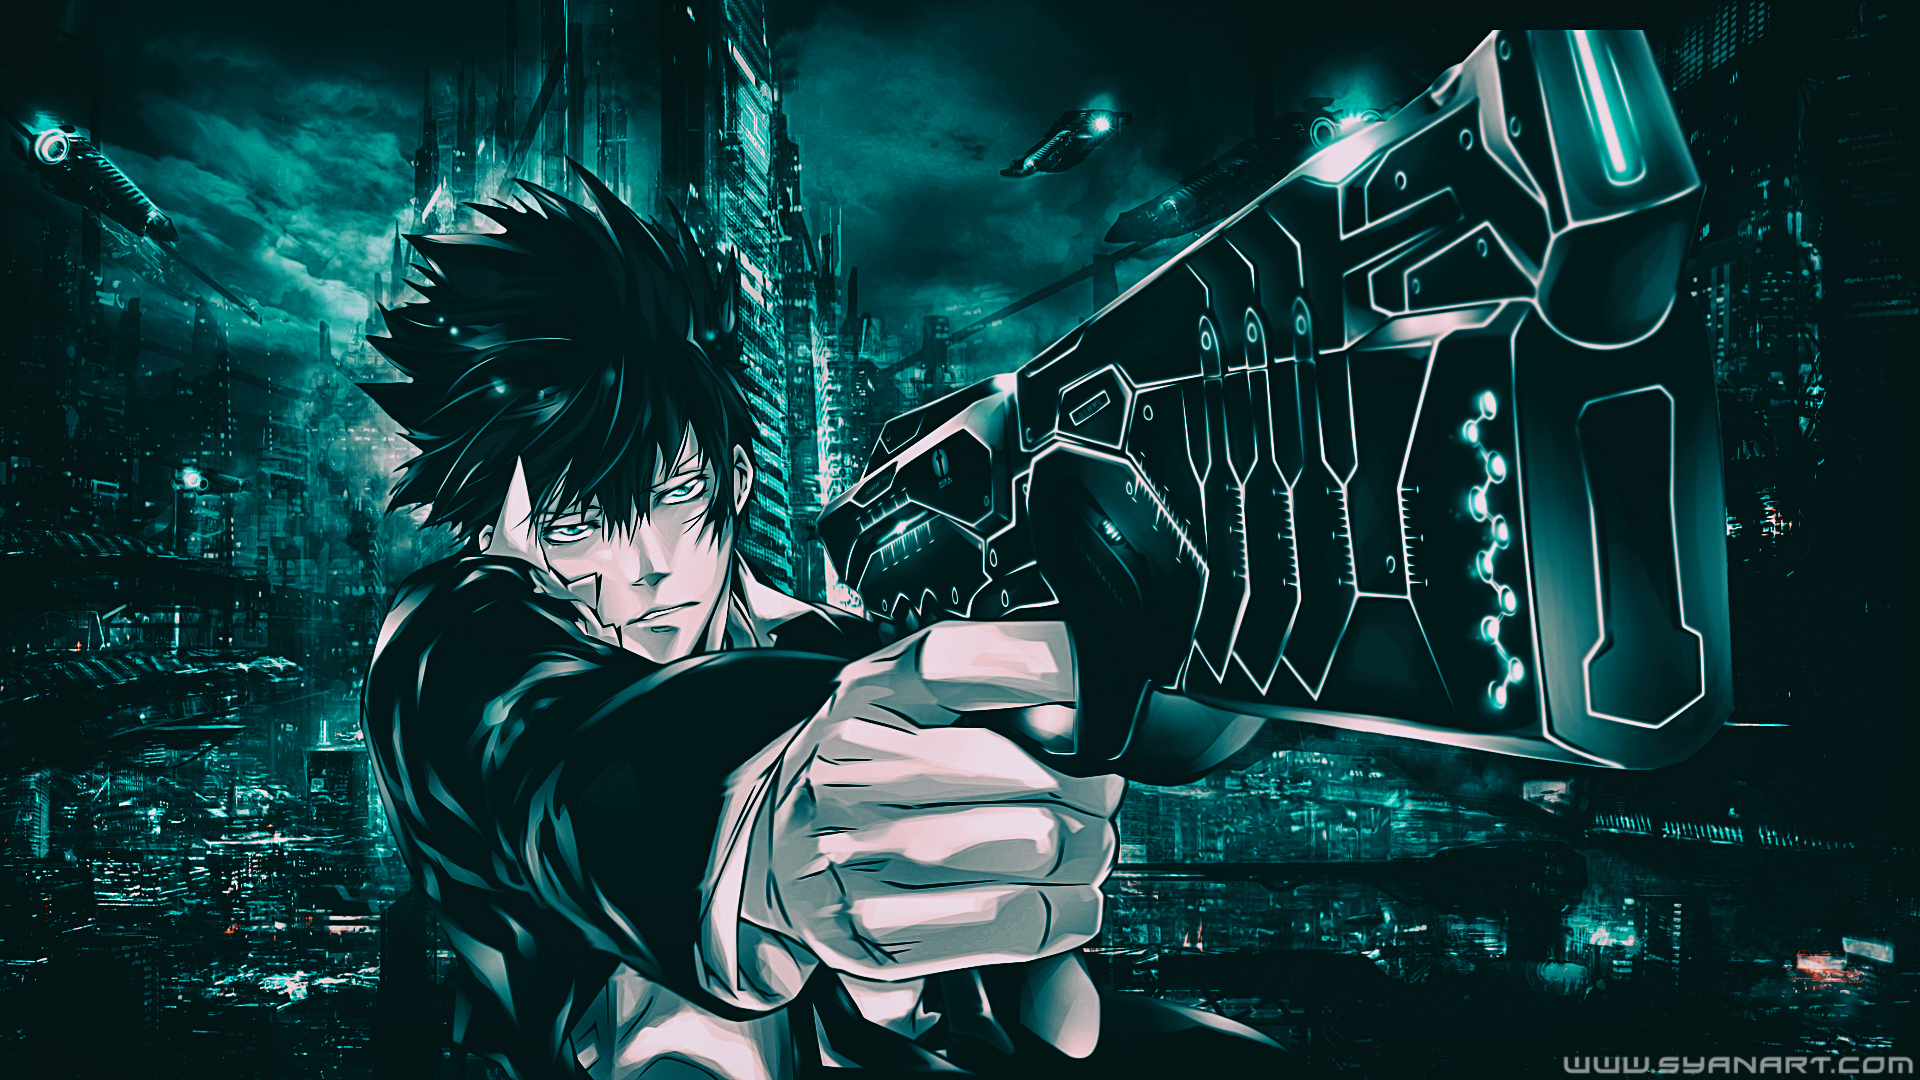 7x1500 Shinya Kogami From Psycho Pass 7x1500 Resolution Wallpaper Hd Anime 4k Wallpapers Images Photos And Background